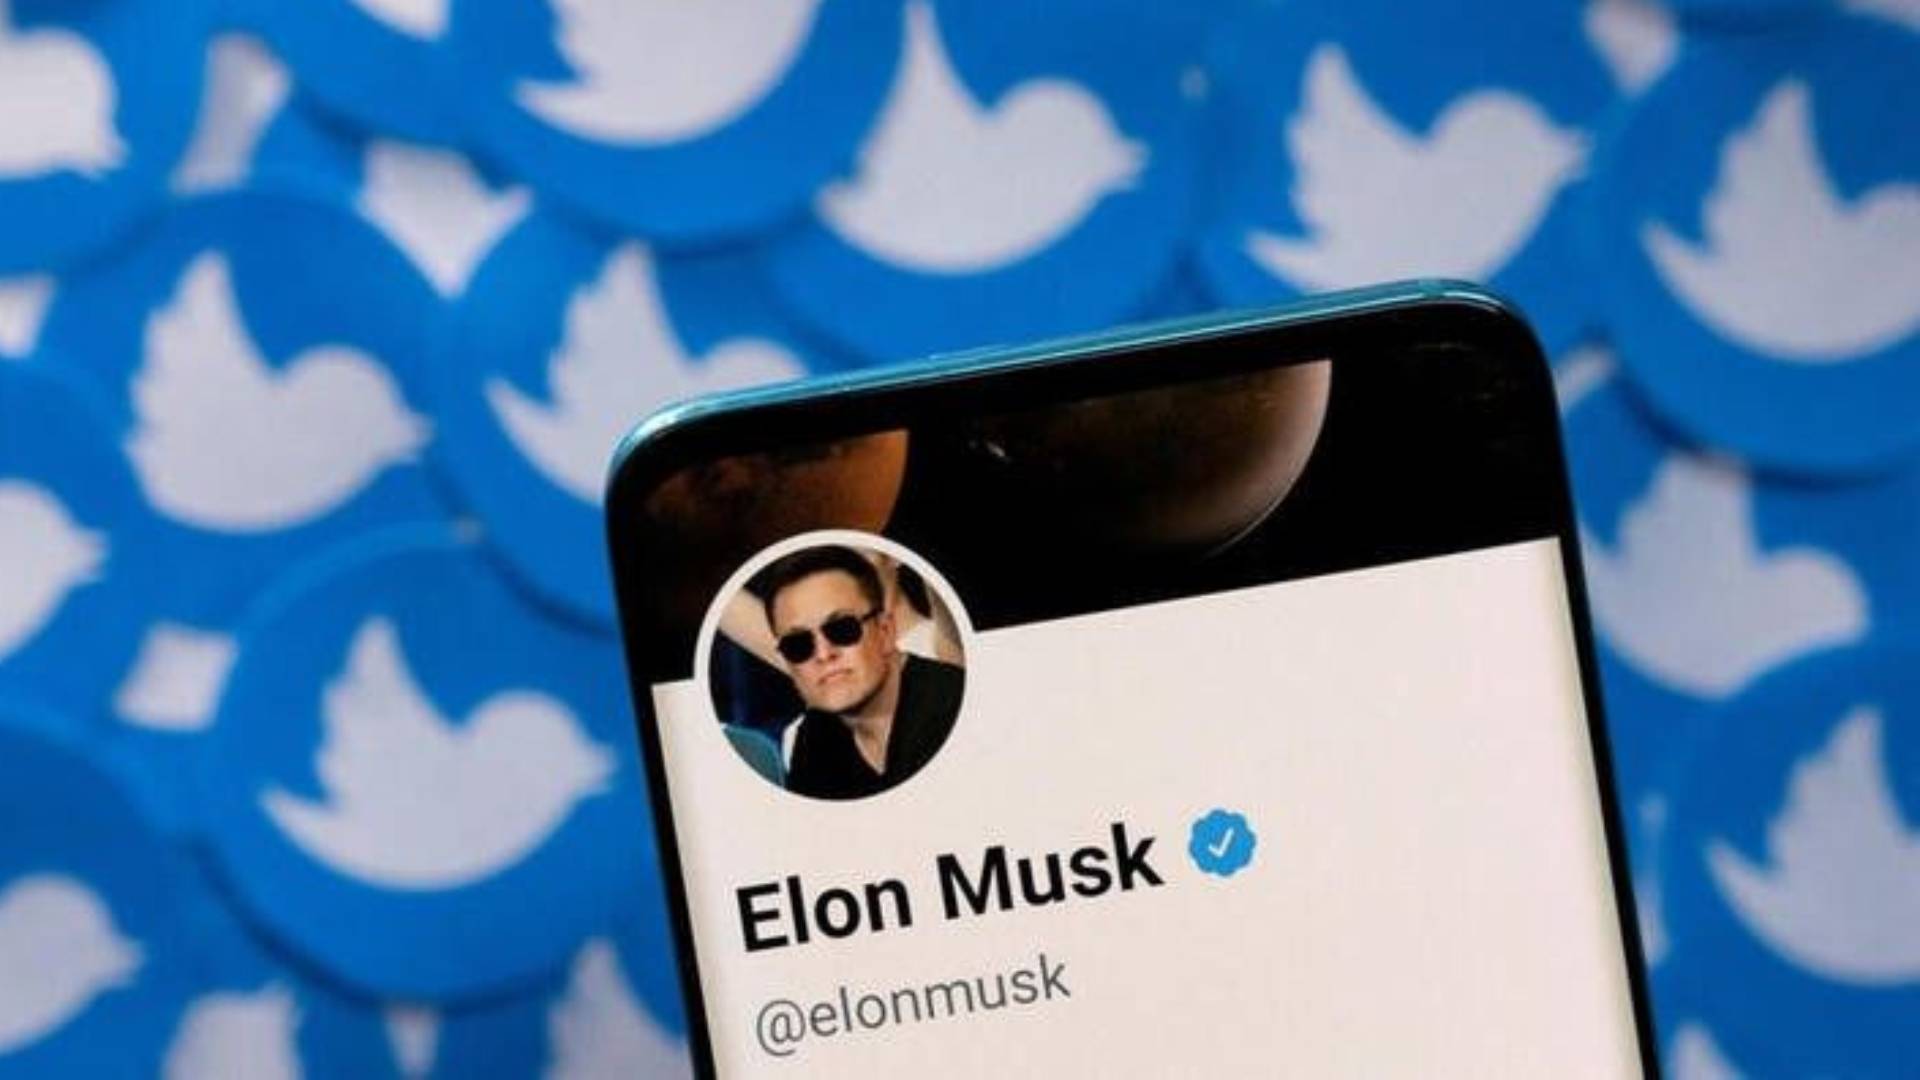  Elon Musk's Twitter profile is seen on a smartphone placed on printed Twitter logos in this picture illustration taken April 28, 2022. REUTERS/Dado Ruvic